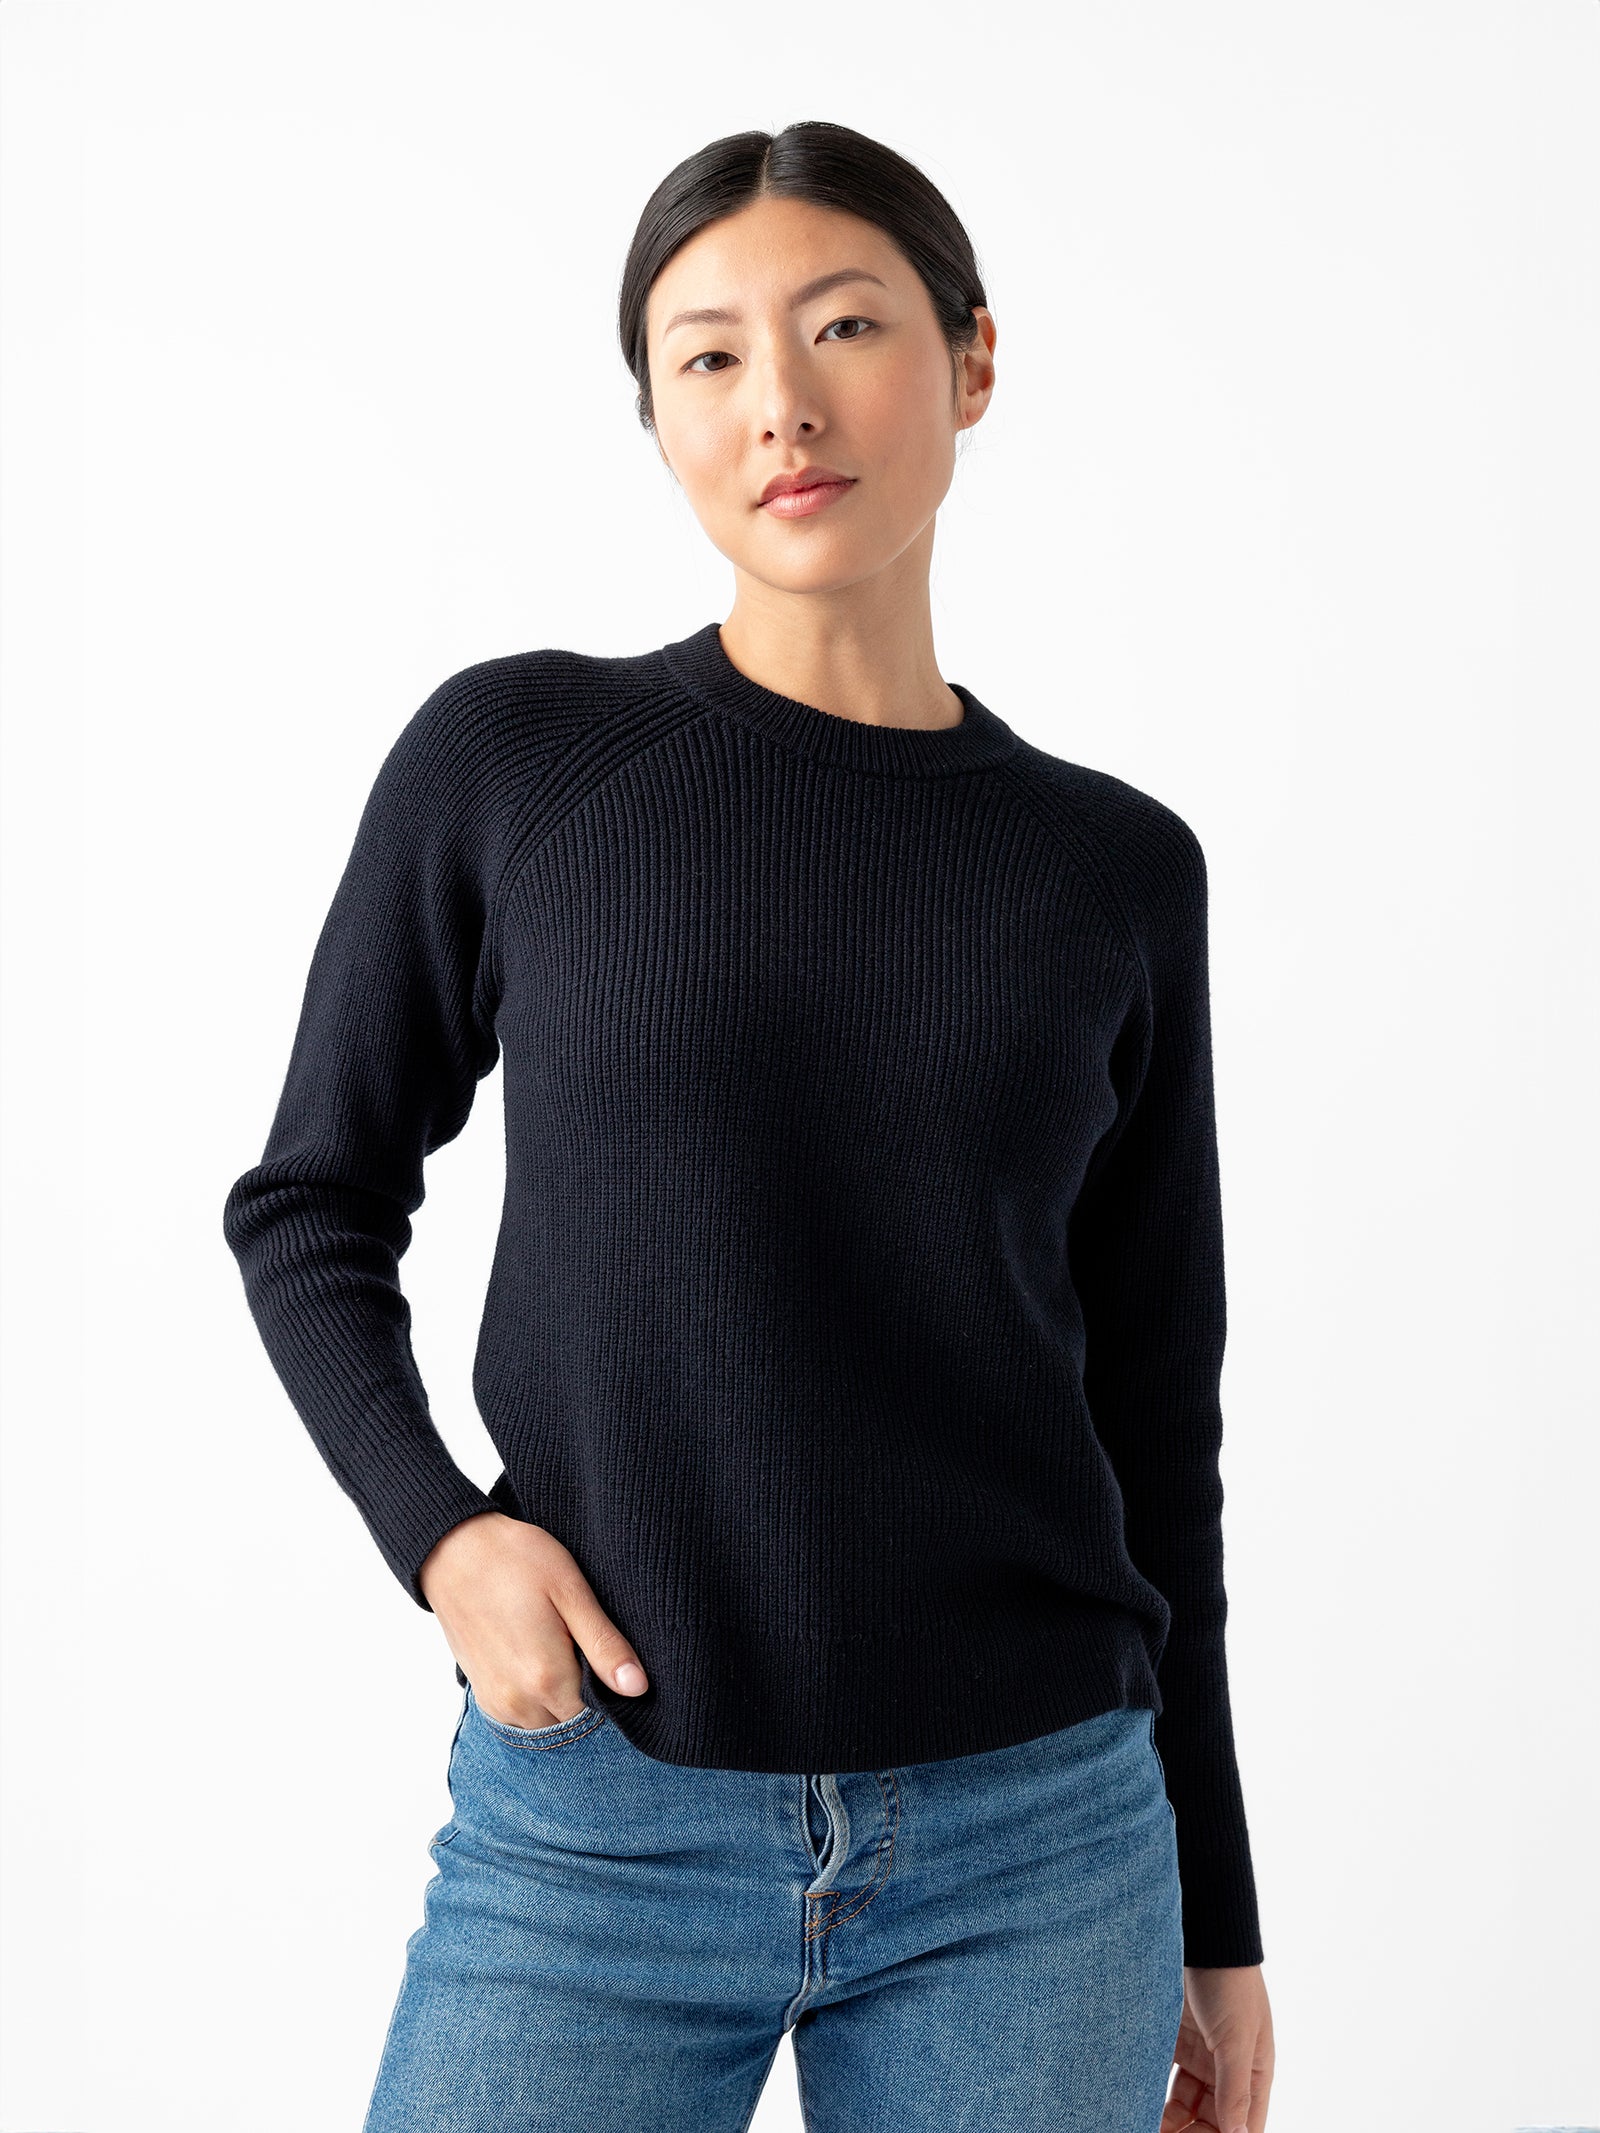 A woman with straight, dark hair is standing against a plain white background. She is wearing Cozy Earth's Women's Classic Crewneck, a knitted long-sleeve dark sweater, paired with blue jeans. Her left hand is in her pocket, and she maintains a neutral expression with her lips closed. 